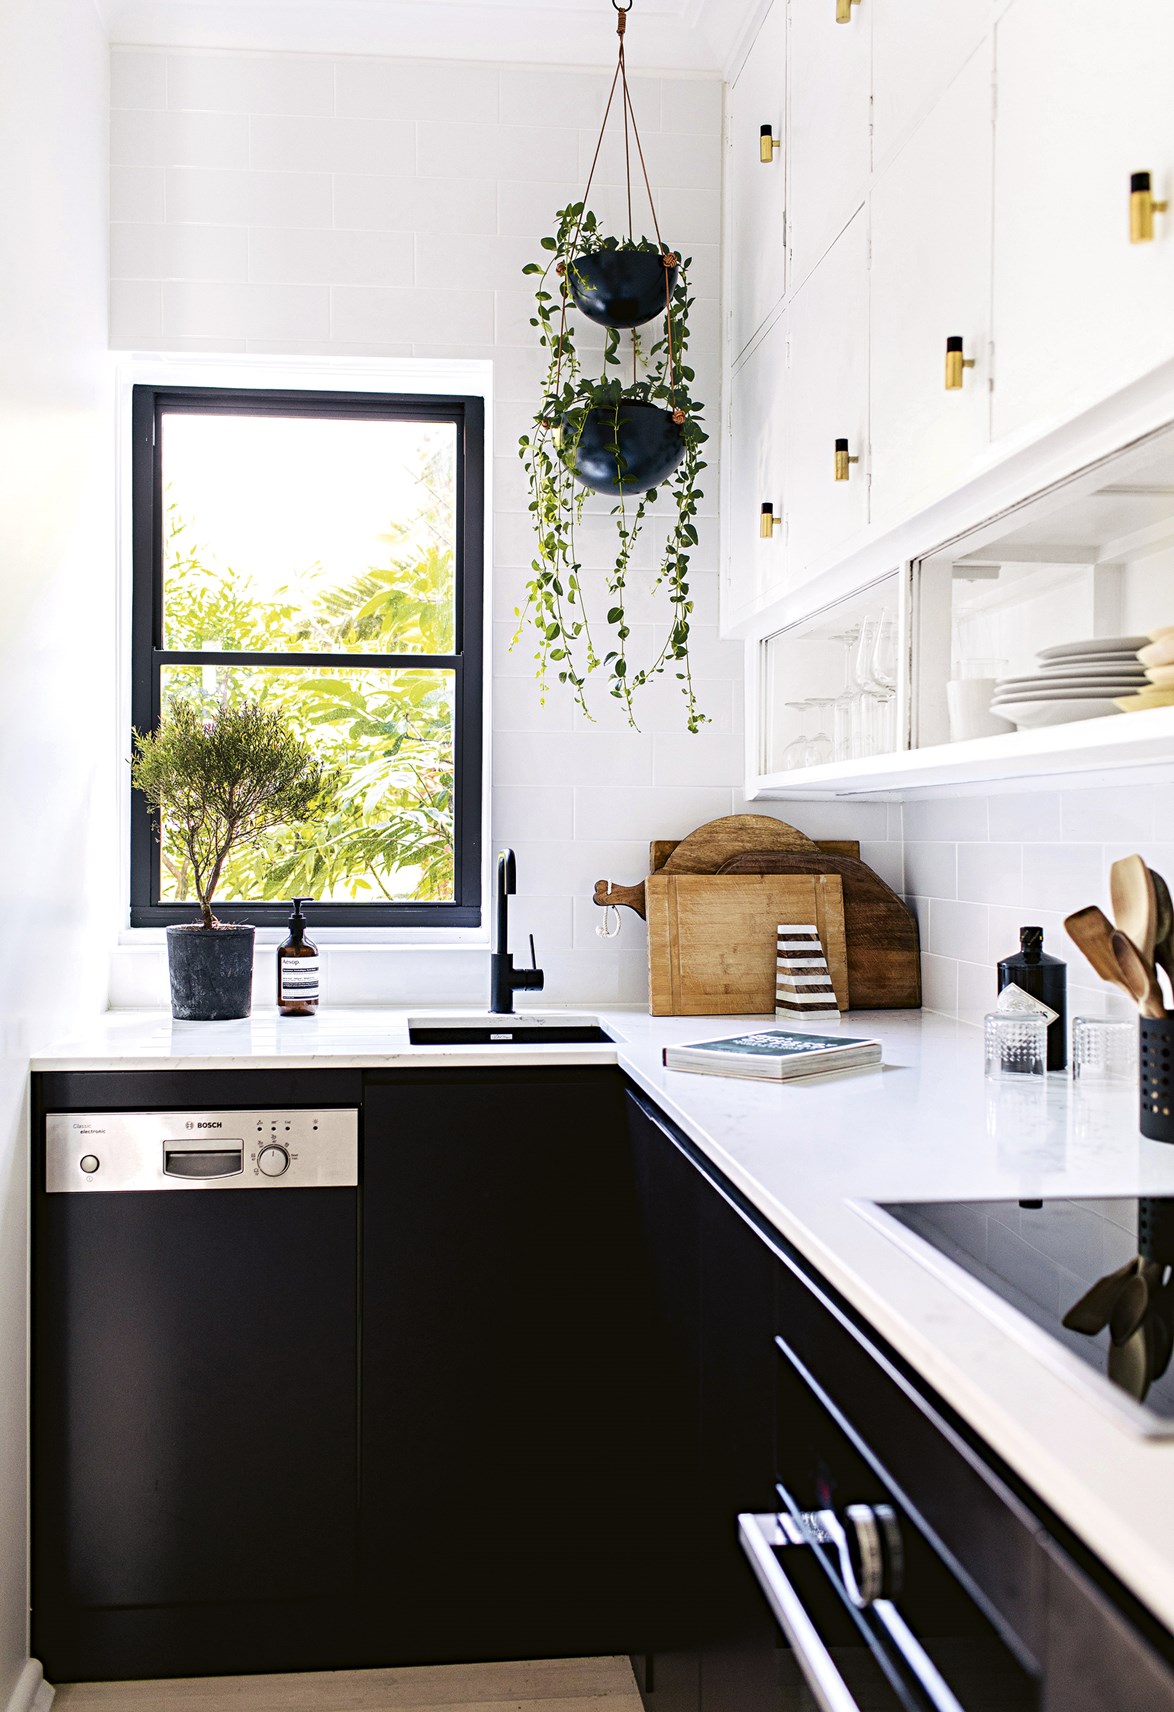 In this small kitchen, black cabinetry has only been used below the benchtop to avoid the space feeling too closed in. A hanging plant helps to draw your eye up and create a sense of height and space.